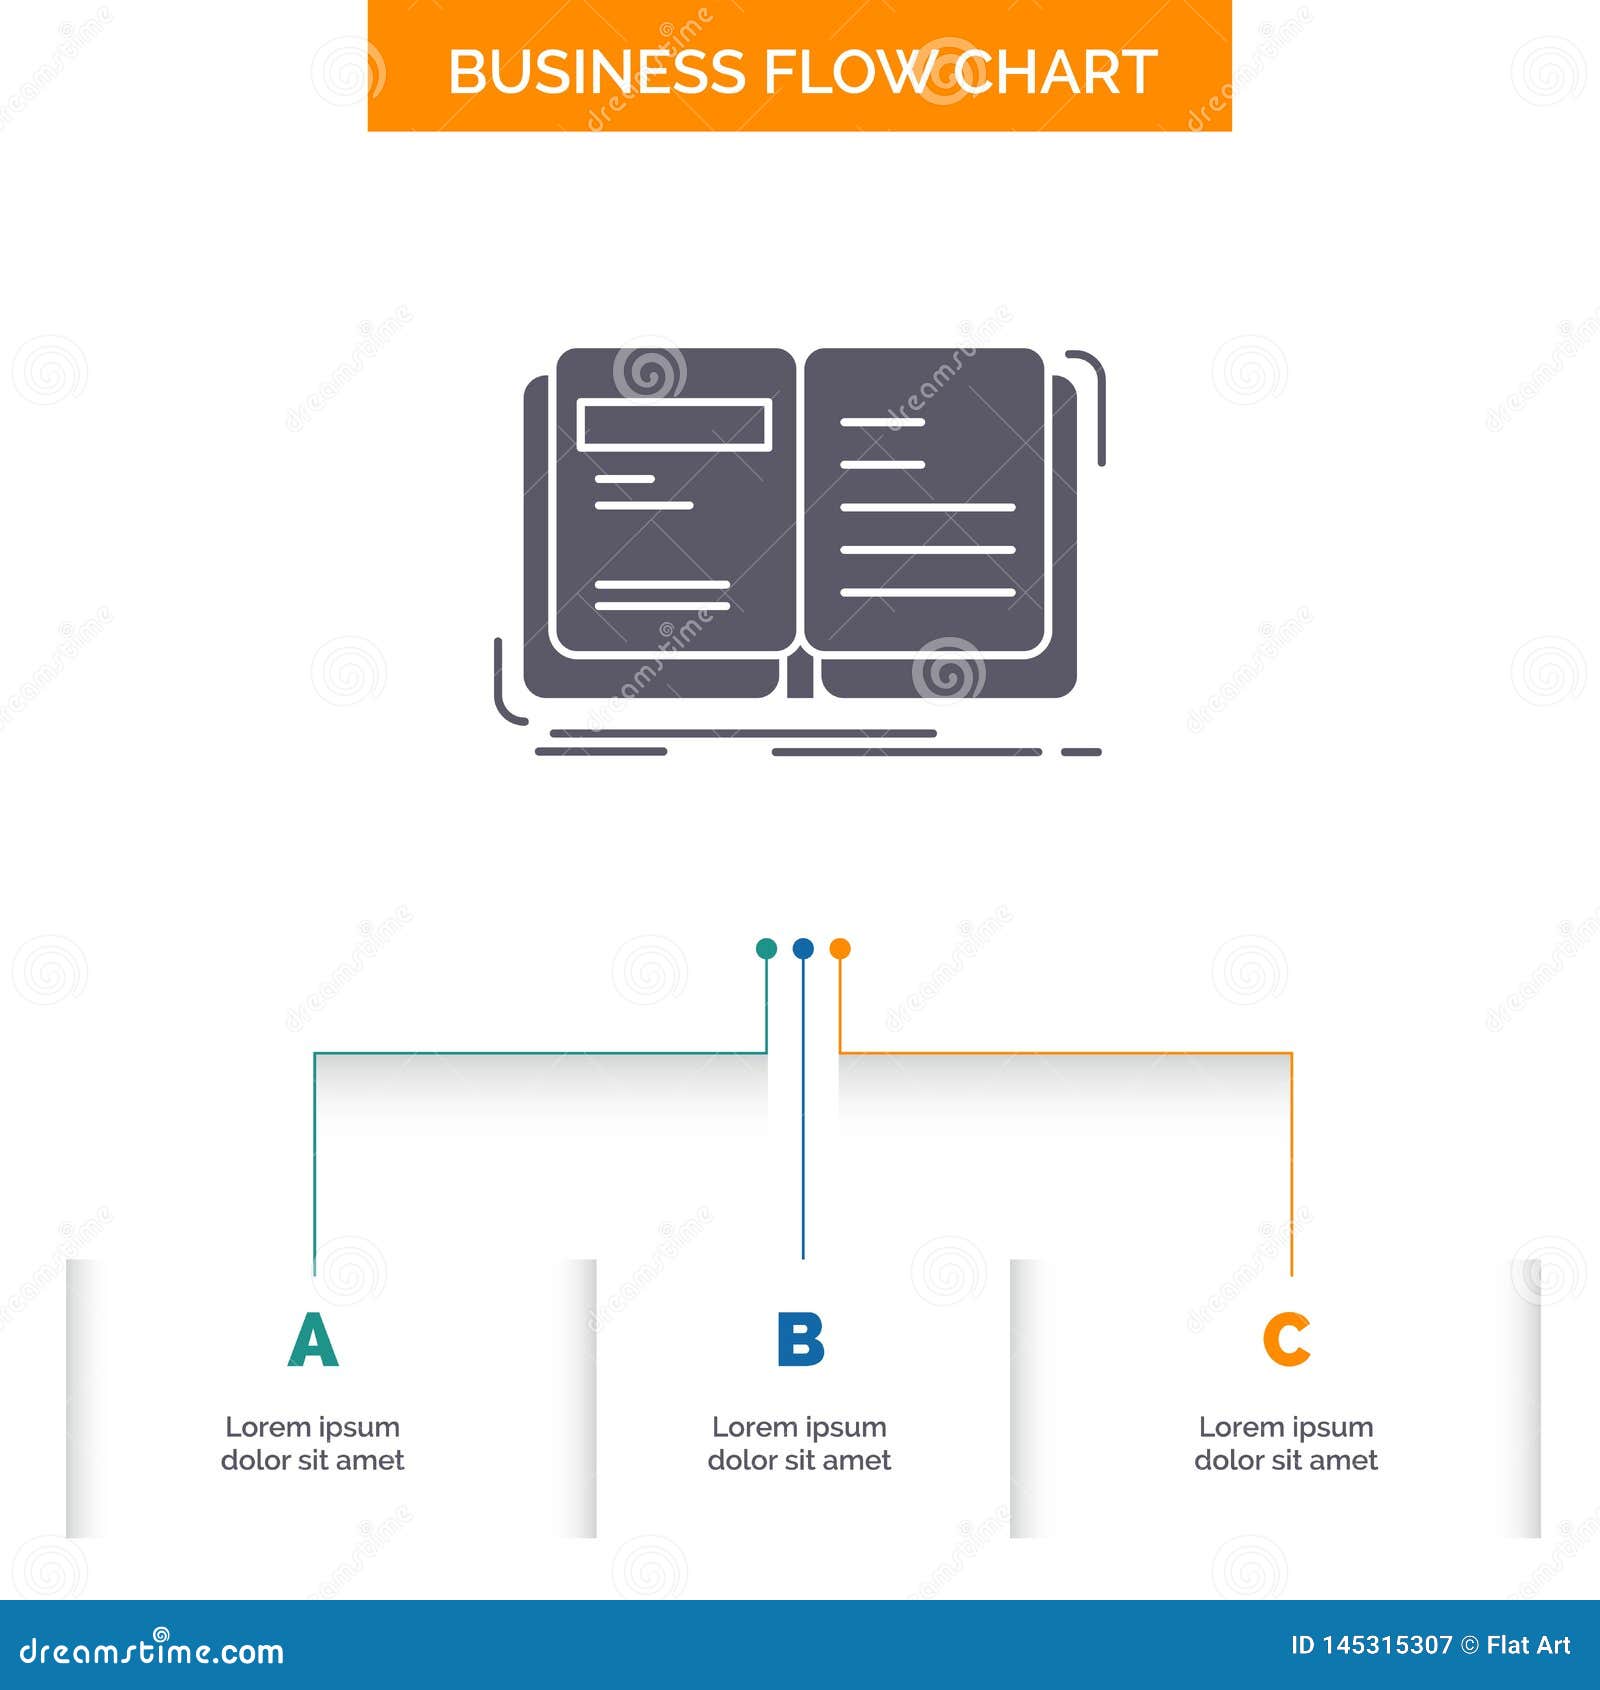 Story Flow Chart